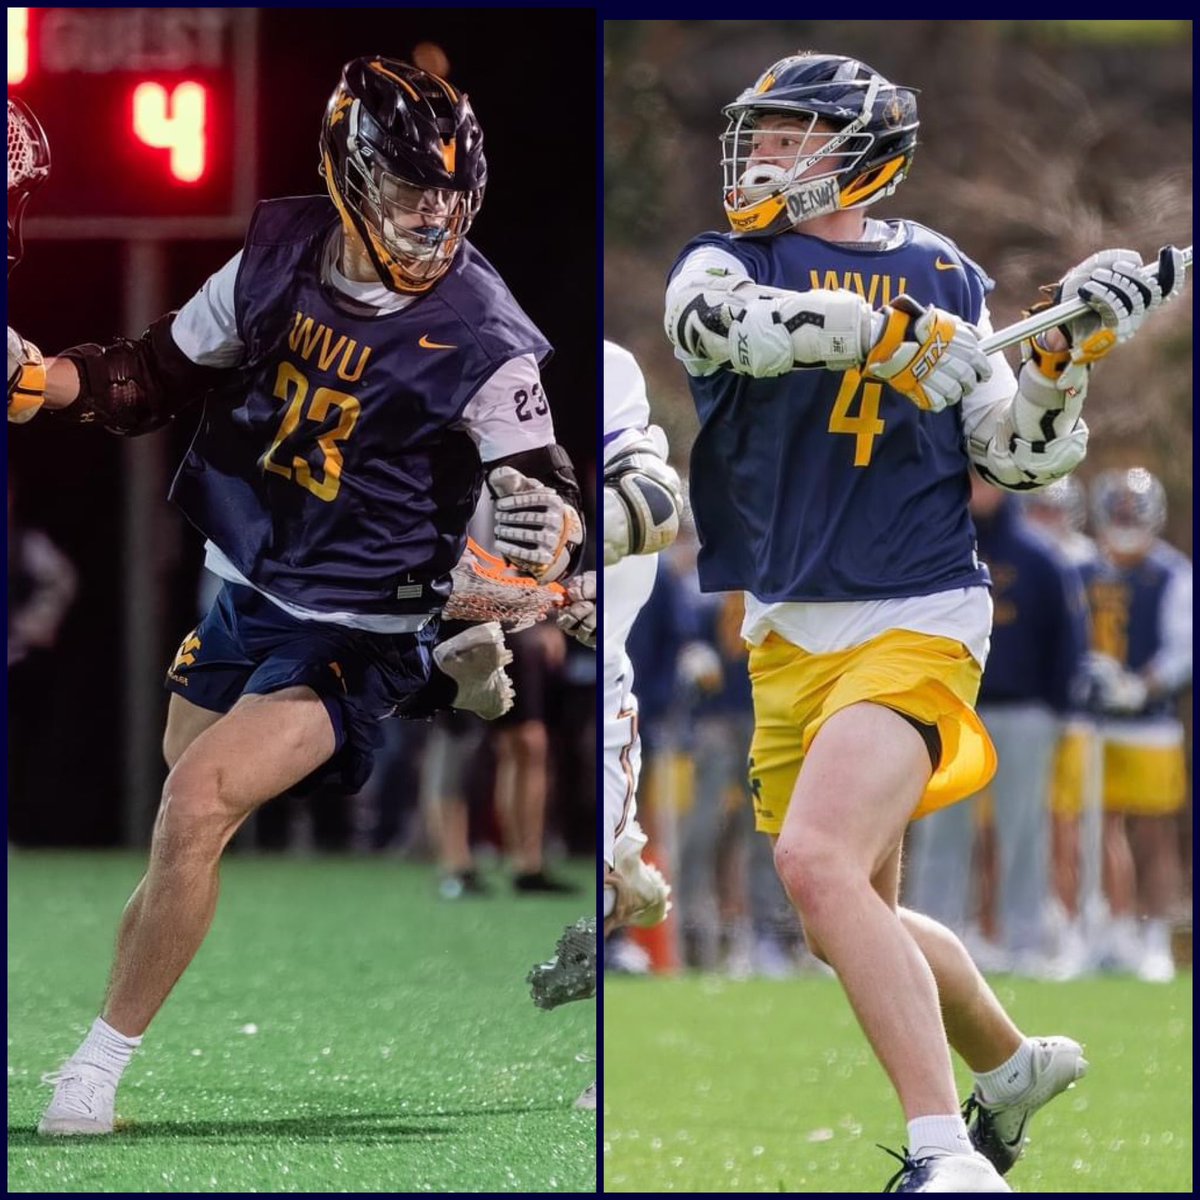 They grew up just 30 minutes apart… separated by the Susquehanna River. They came together as freshmen and have led @WVULax to new heights. Together, #23 Brock Altland and #4 Will Stone have combined for over 120 points in 3 years. A grateful team and fan base pays homage.